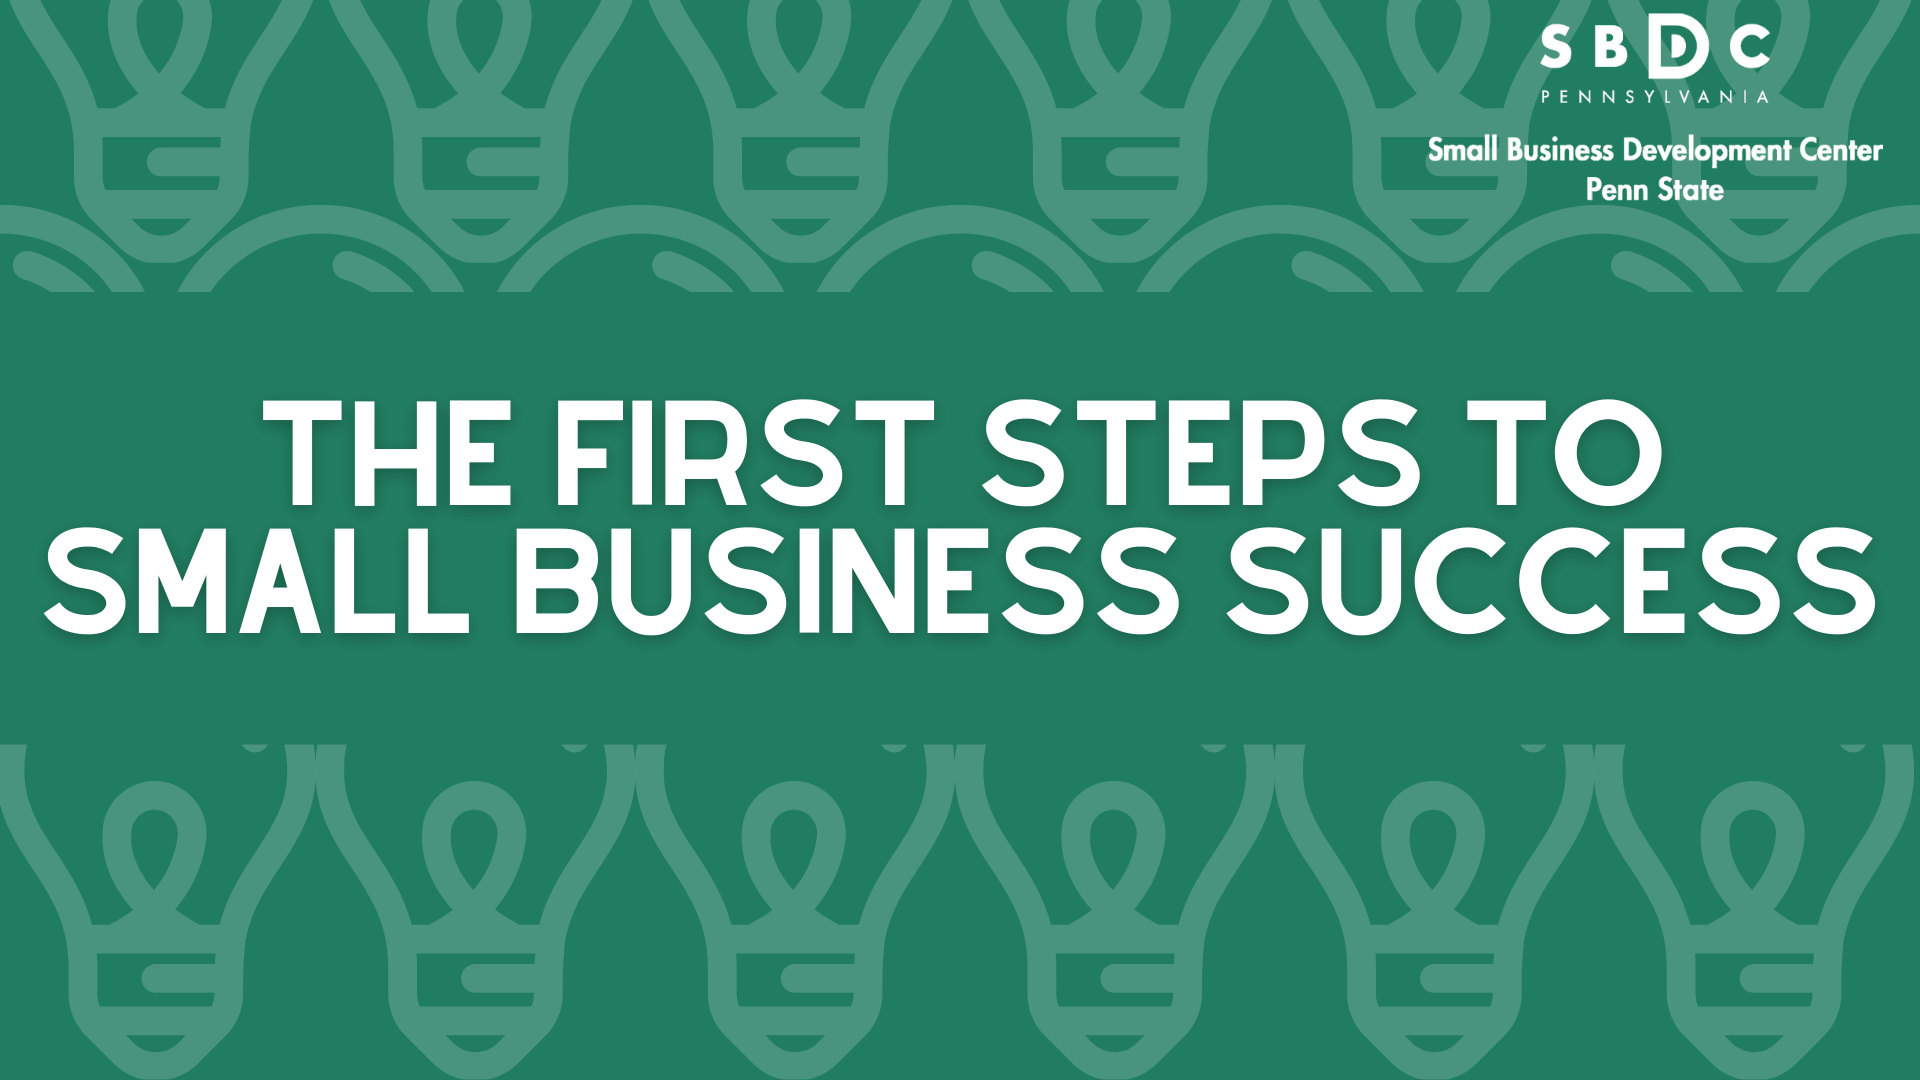 The First Steps to Small Business Success